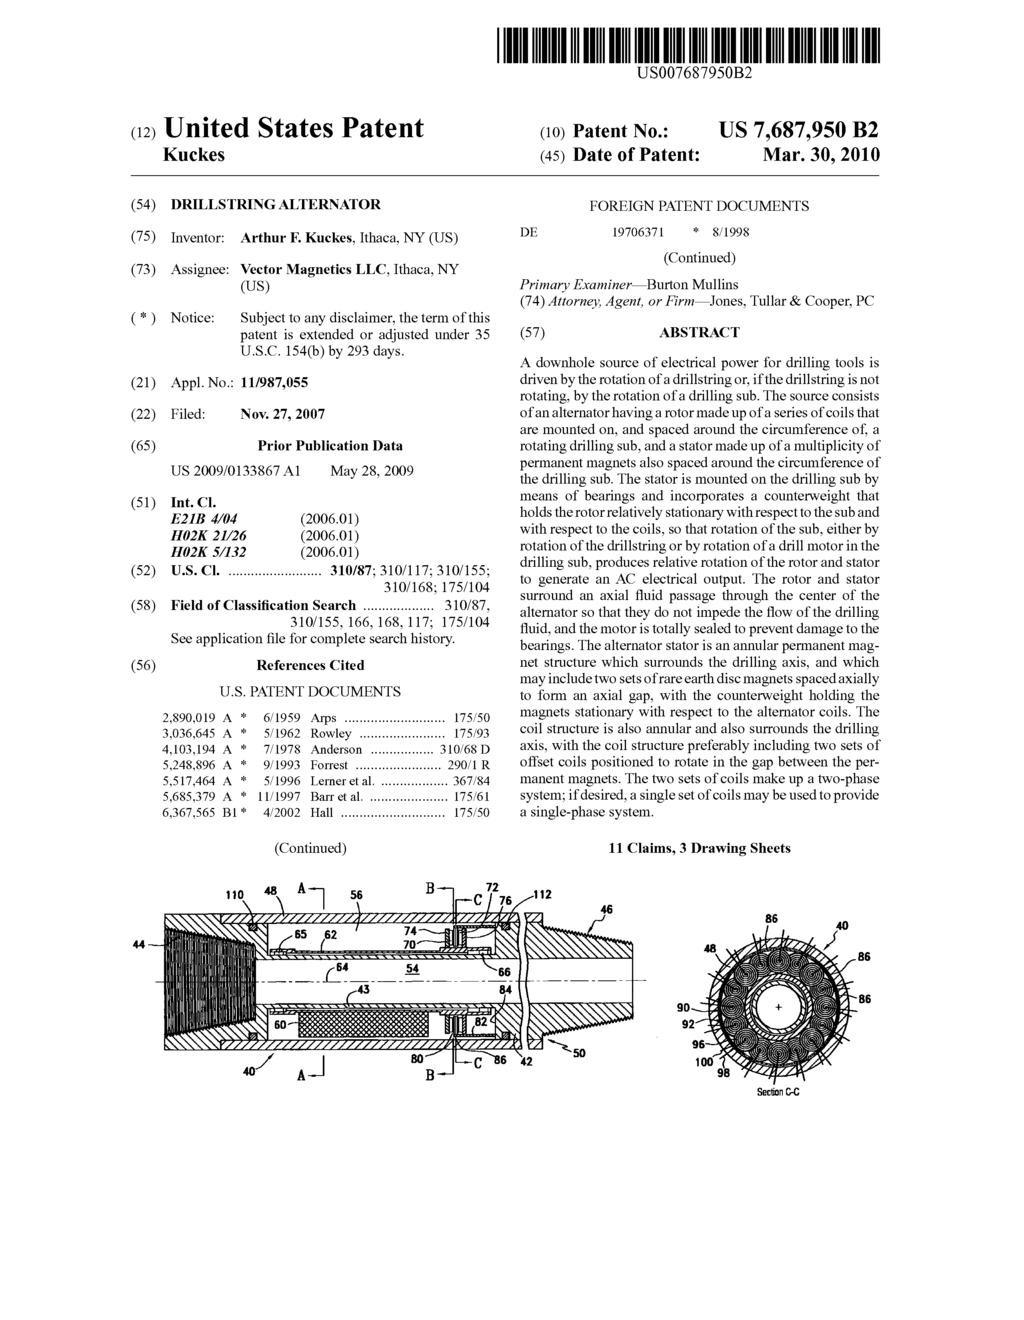 USOO768795OB2 (12) United States Patent (10) Patent No.: US 7,687,950 B2 Kuckes (45) Date of Patent: Mar. 30, 2010 (54) DRILLSTRING ALTERNATOR FOREIGN PATENT DOCUMENTS (75) Inventor: Arthur F.